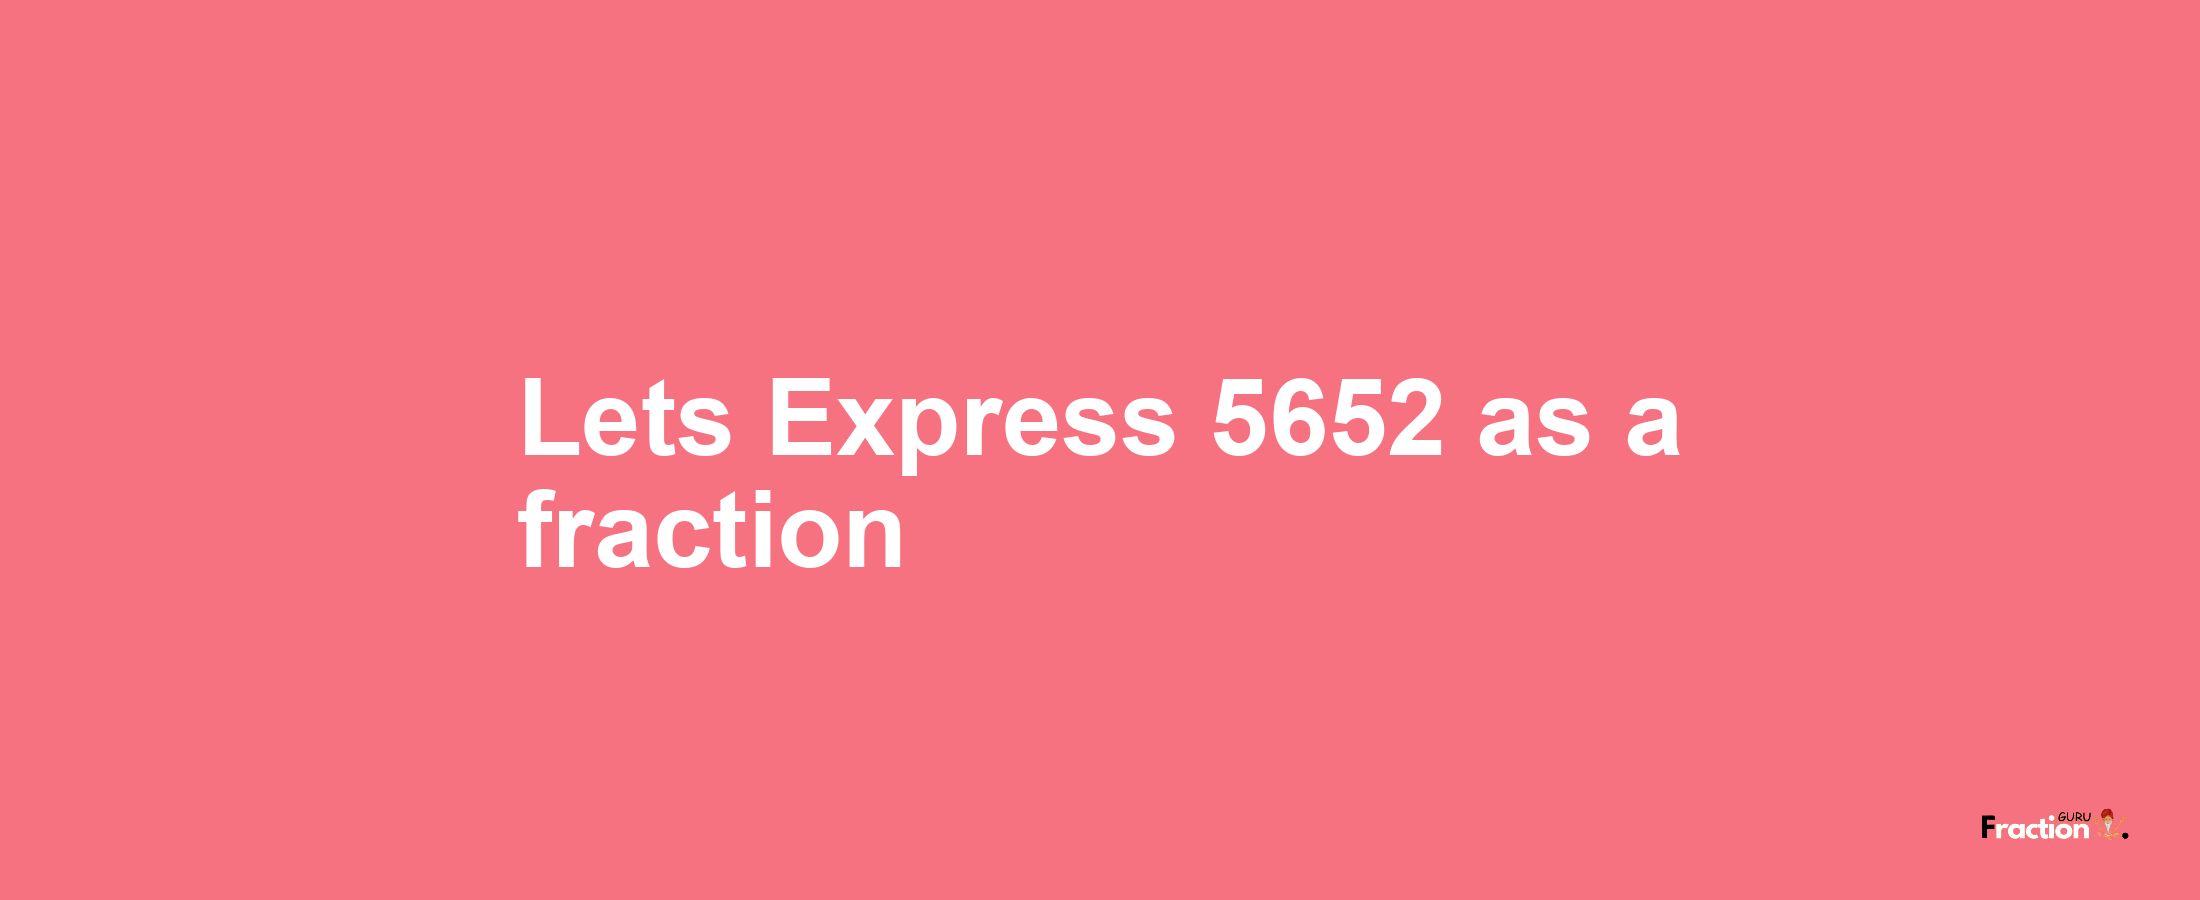 Lets Express 5652 as afraction